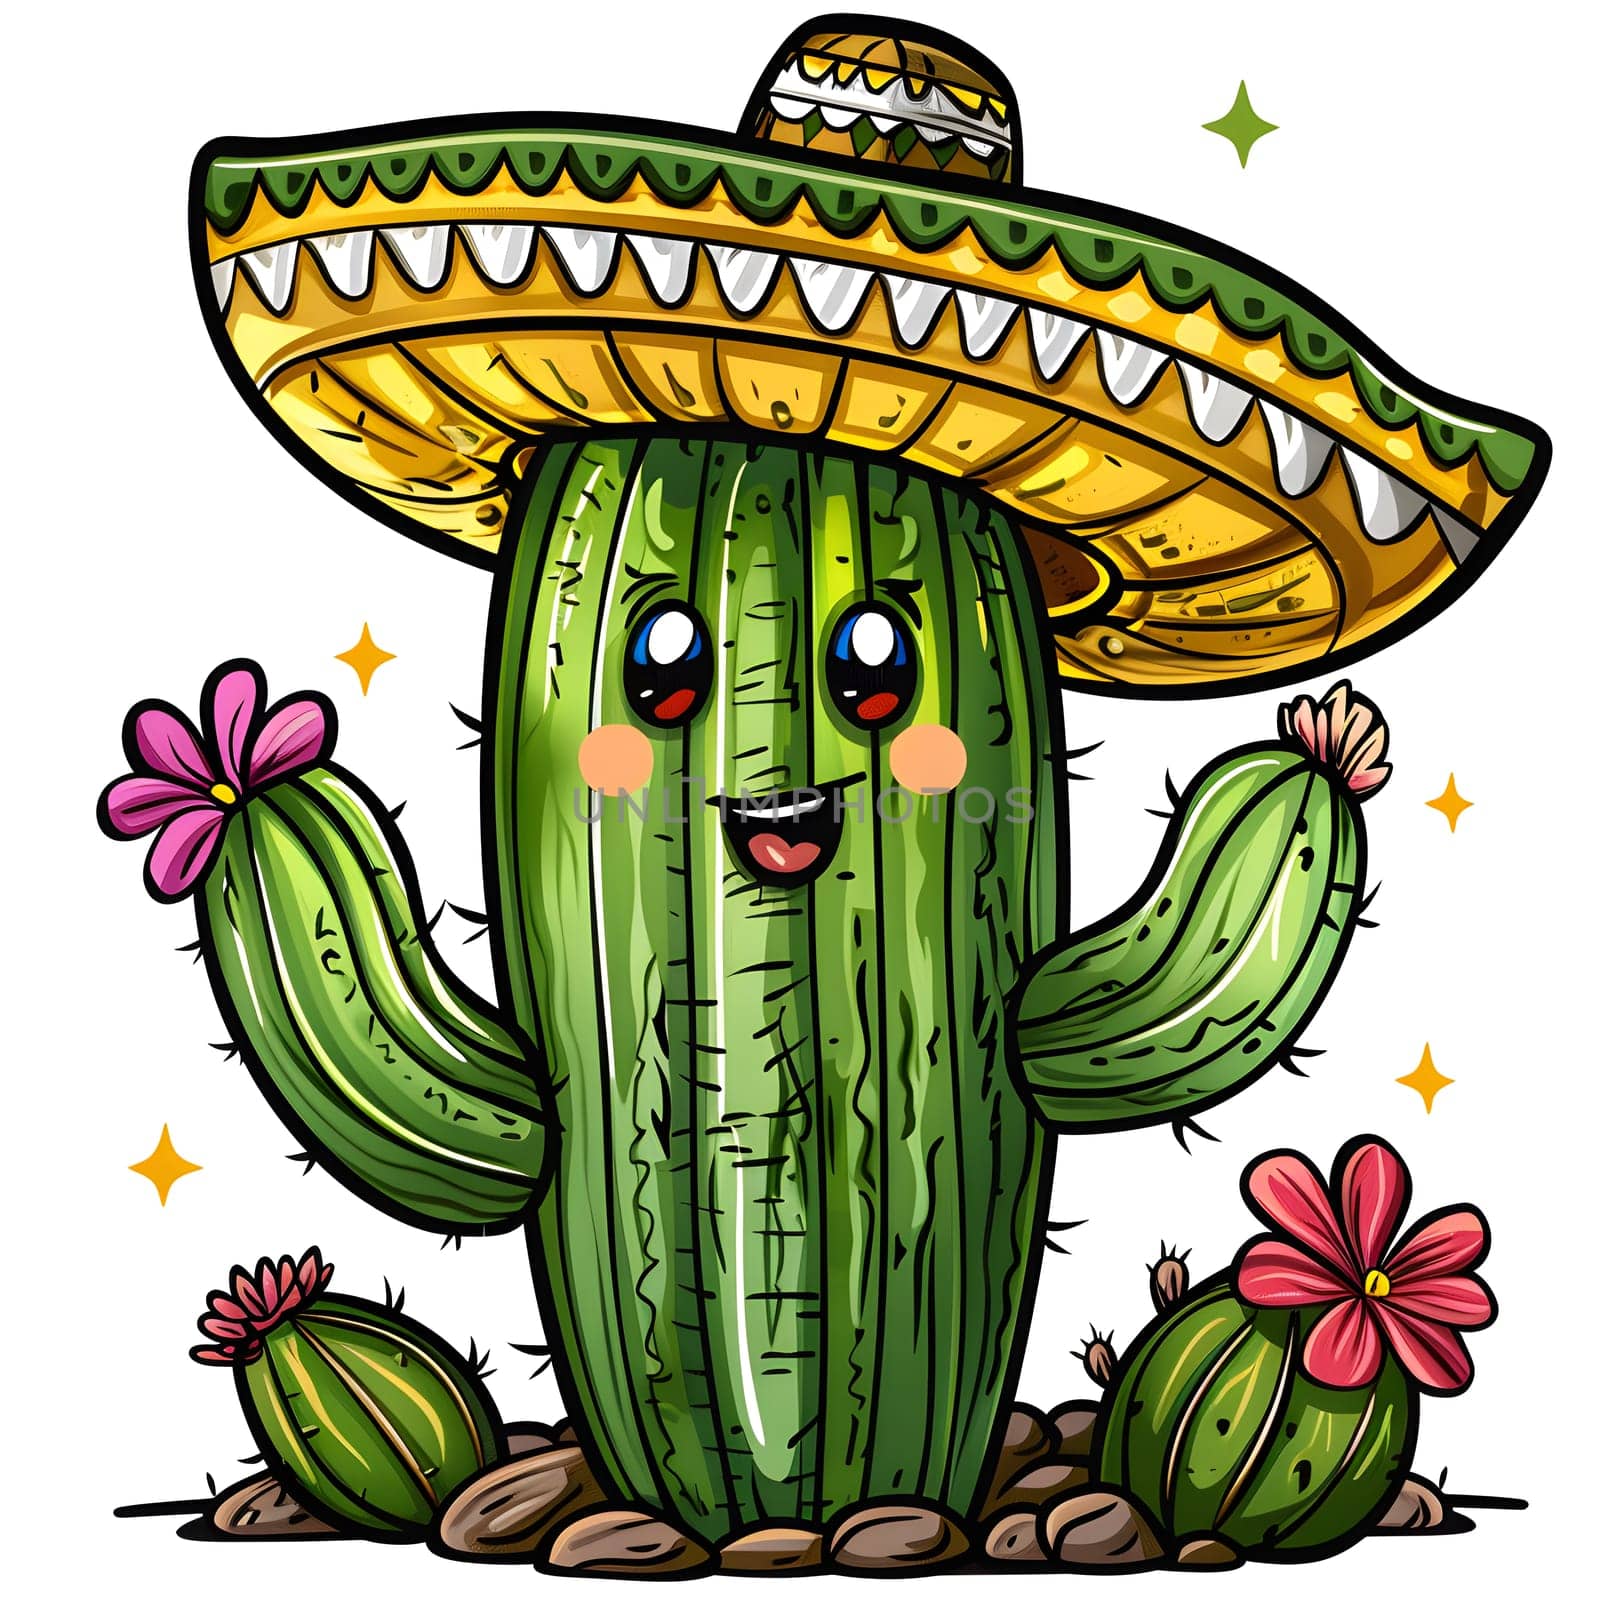 A cartoon cactus adorned with a sombrero and holding a vibrant flower, showcasing the creativity and artistry of botanical illustration